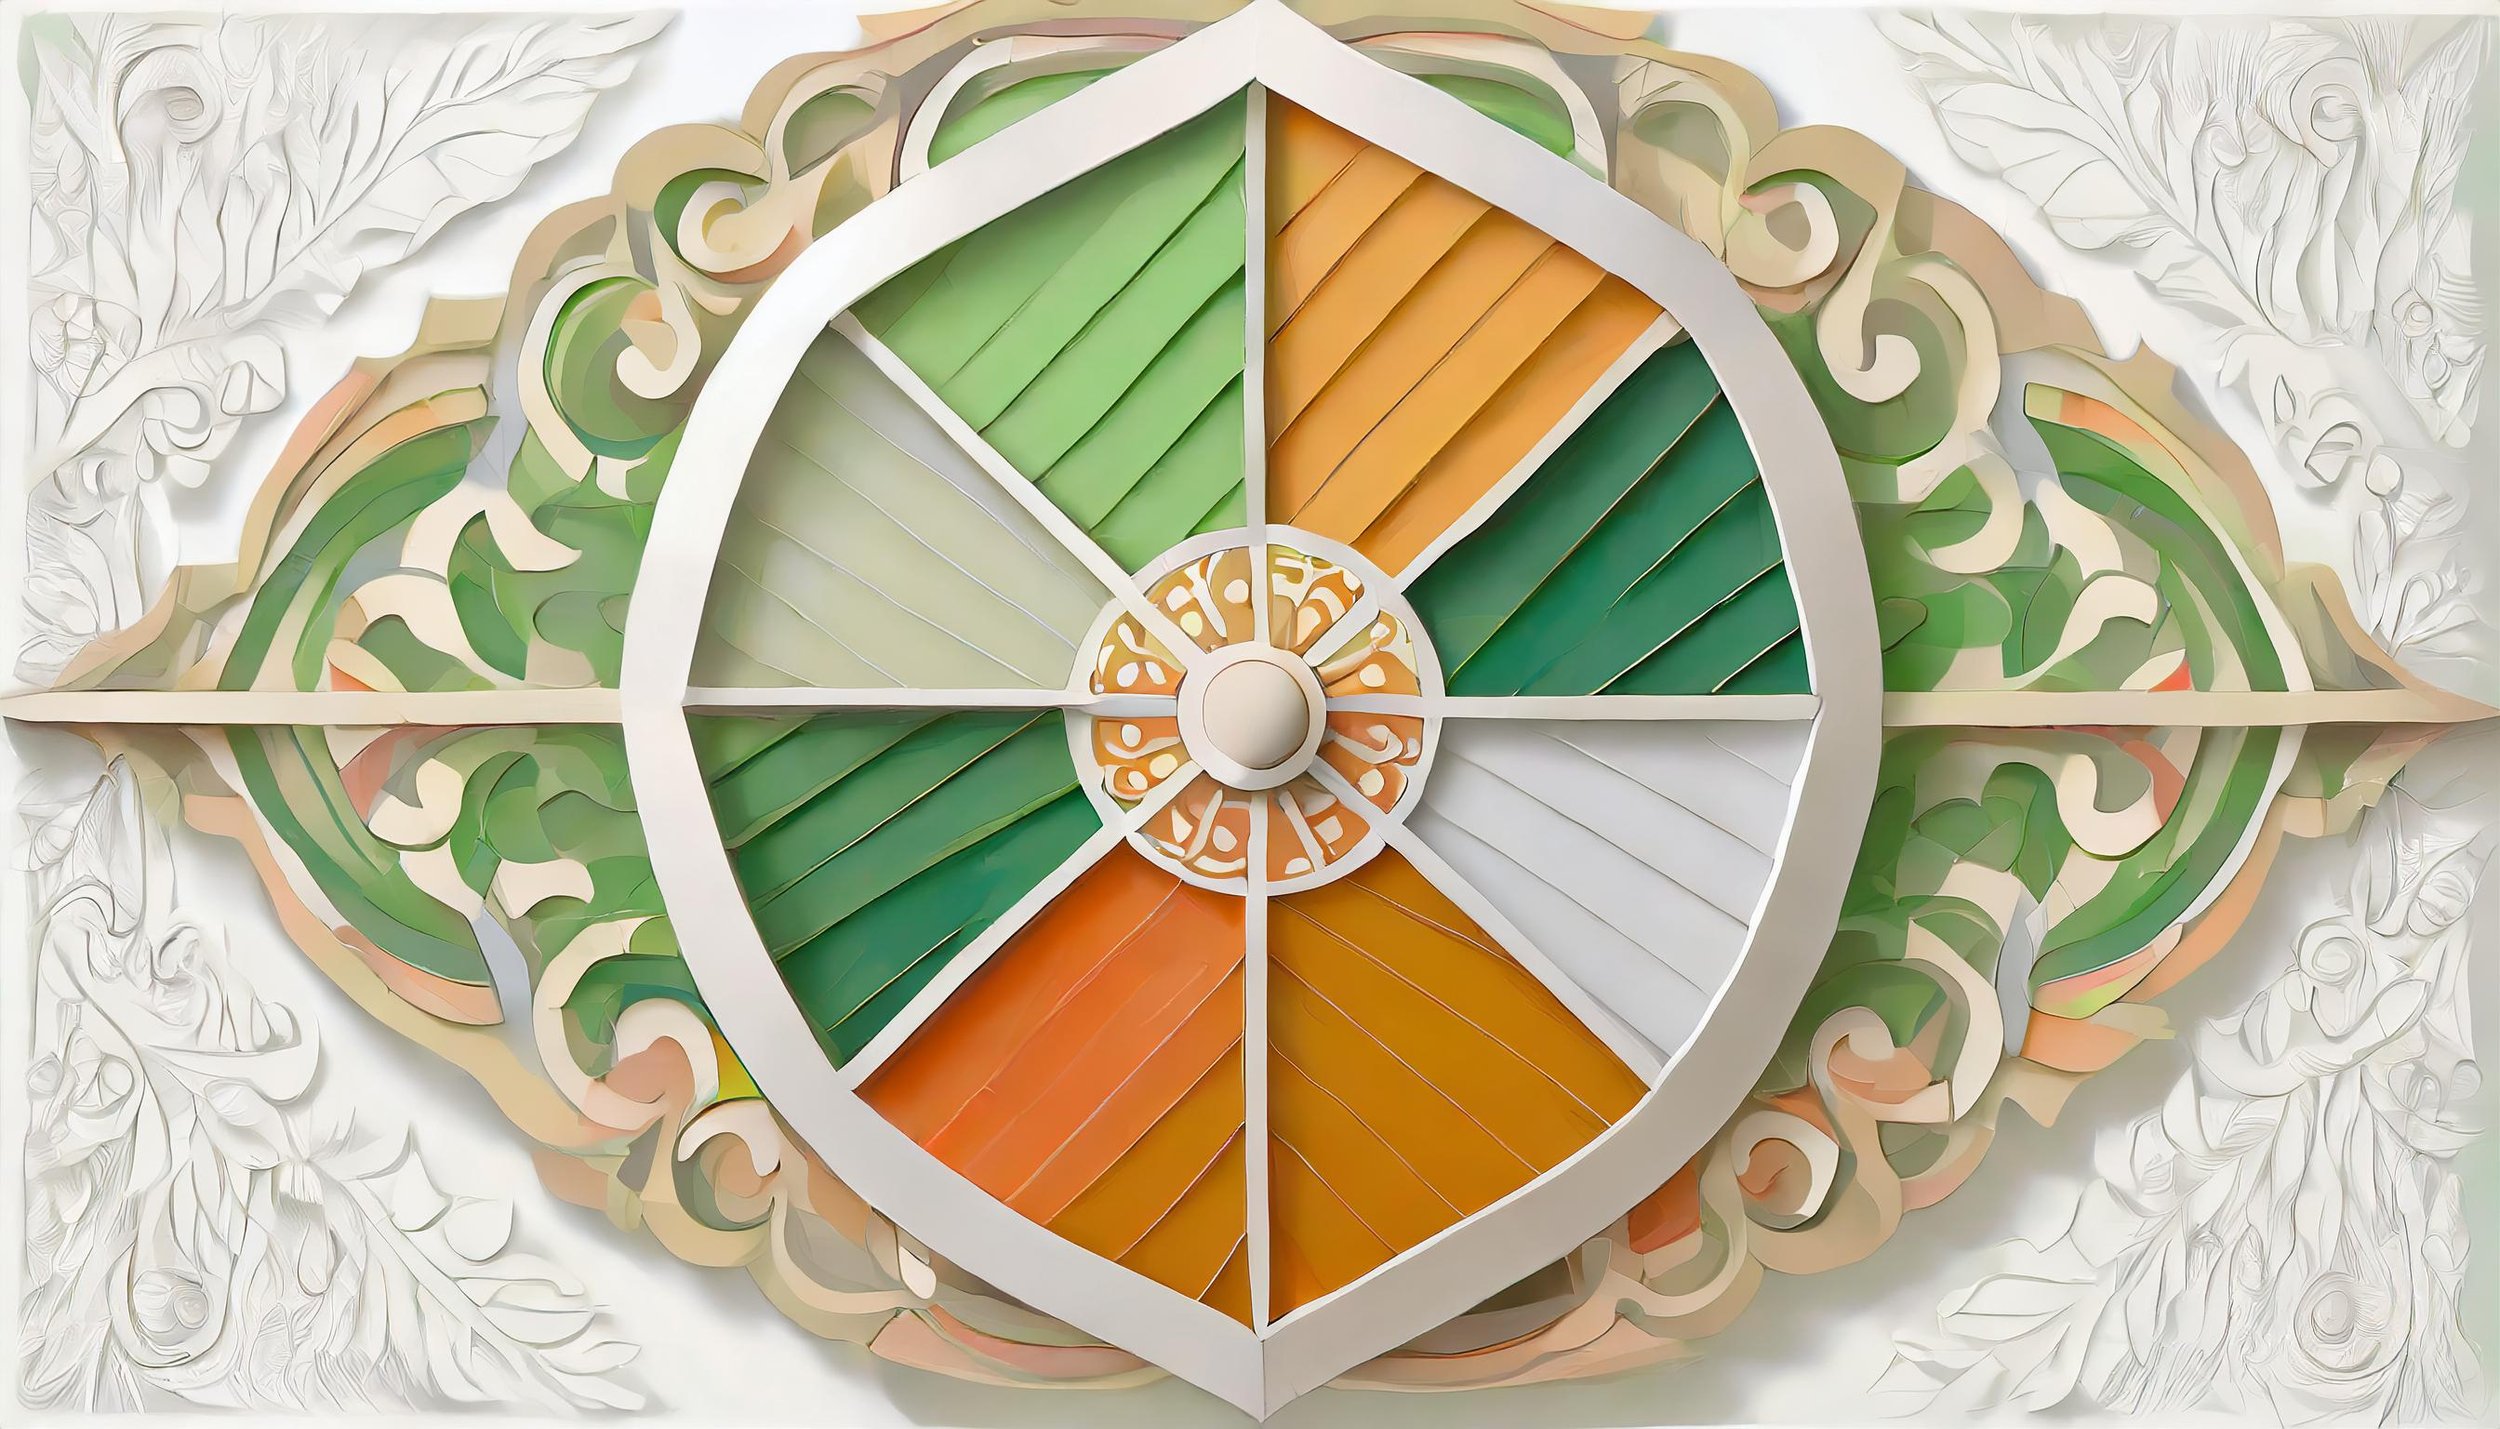 Firefly flat illustration of a medieval shield divided into six sections; oranges and greens; framed (2).jpg